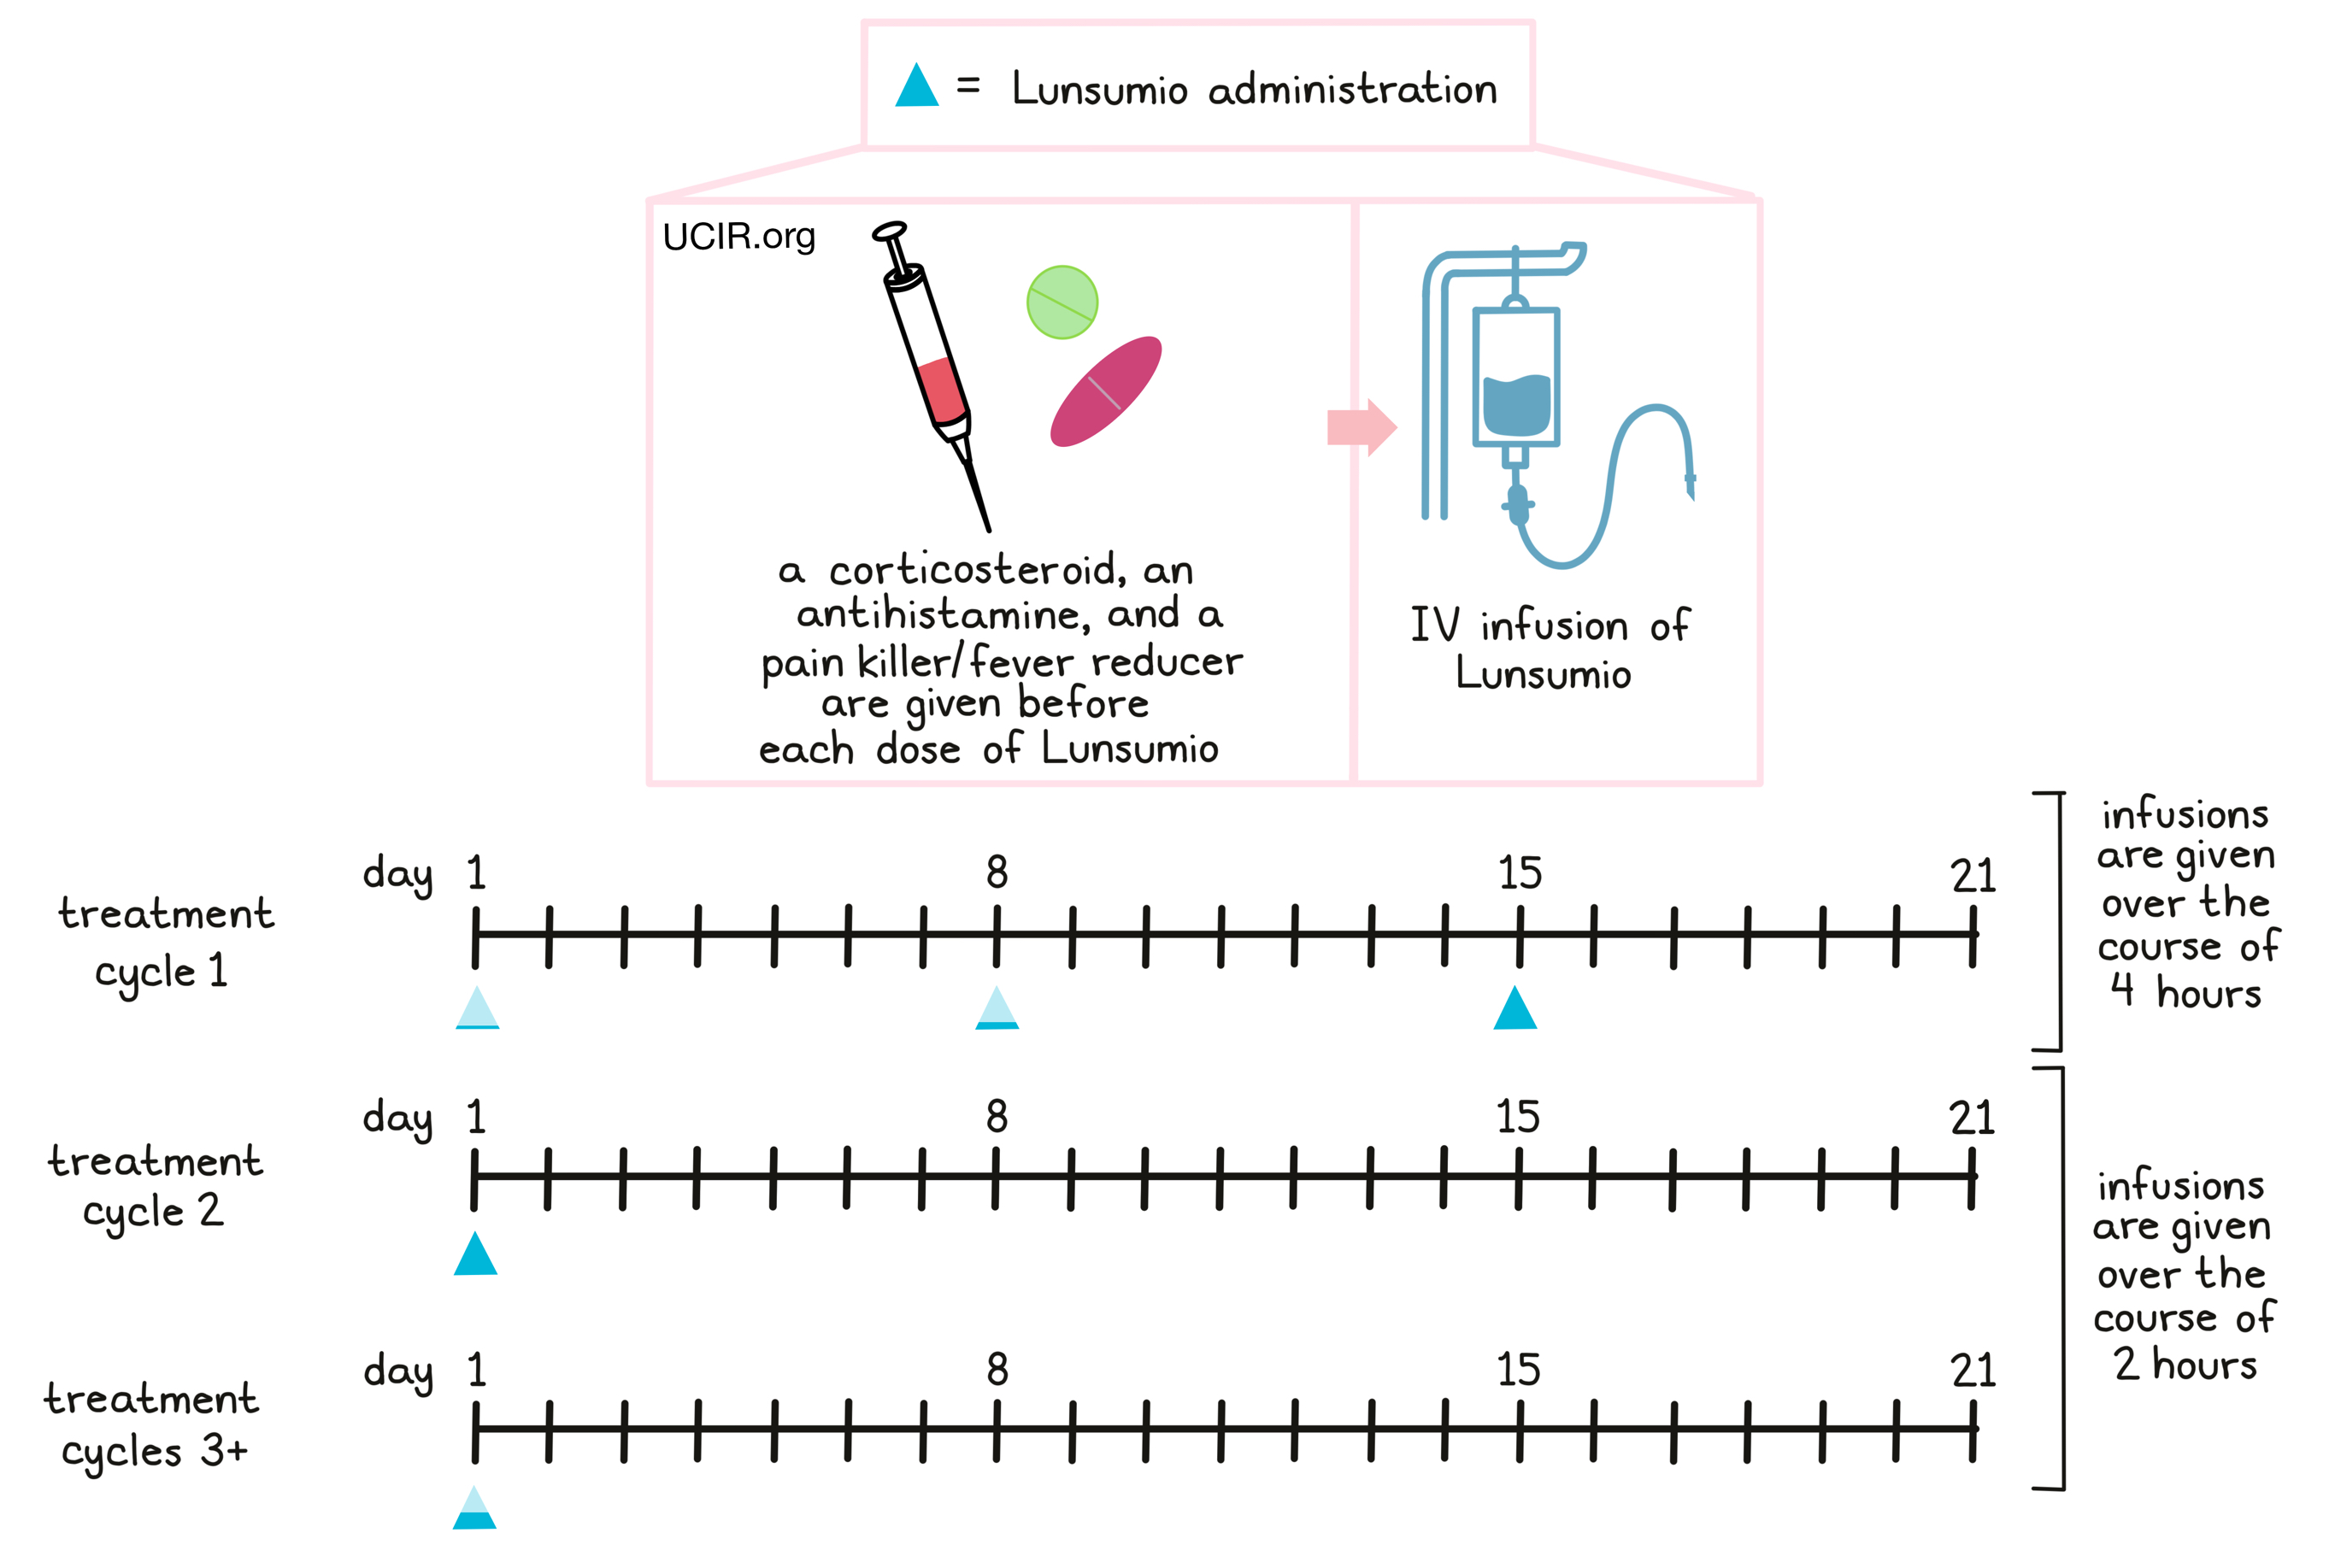 Illustration showing how Lunsumio is administered to patients